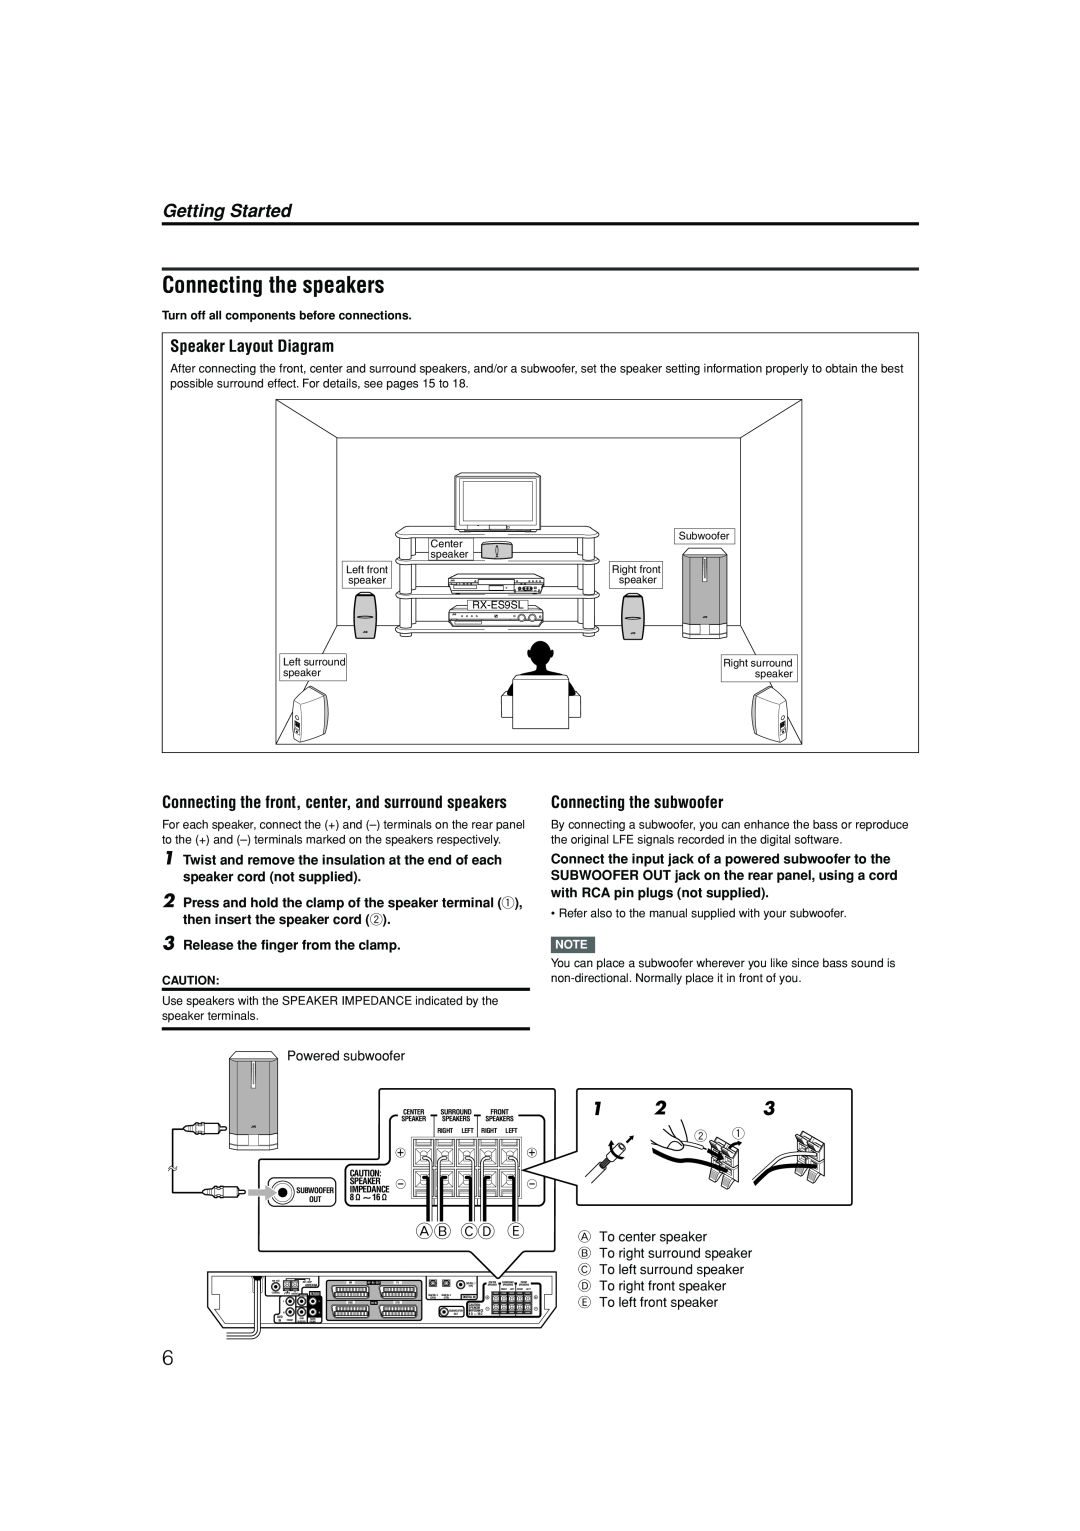 JVC LVT1112-001A manual Connecting the speakers, Getting Started, Speaker Layout Diagram, Connecting the subwoofer, Ab Cd E 